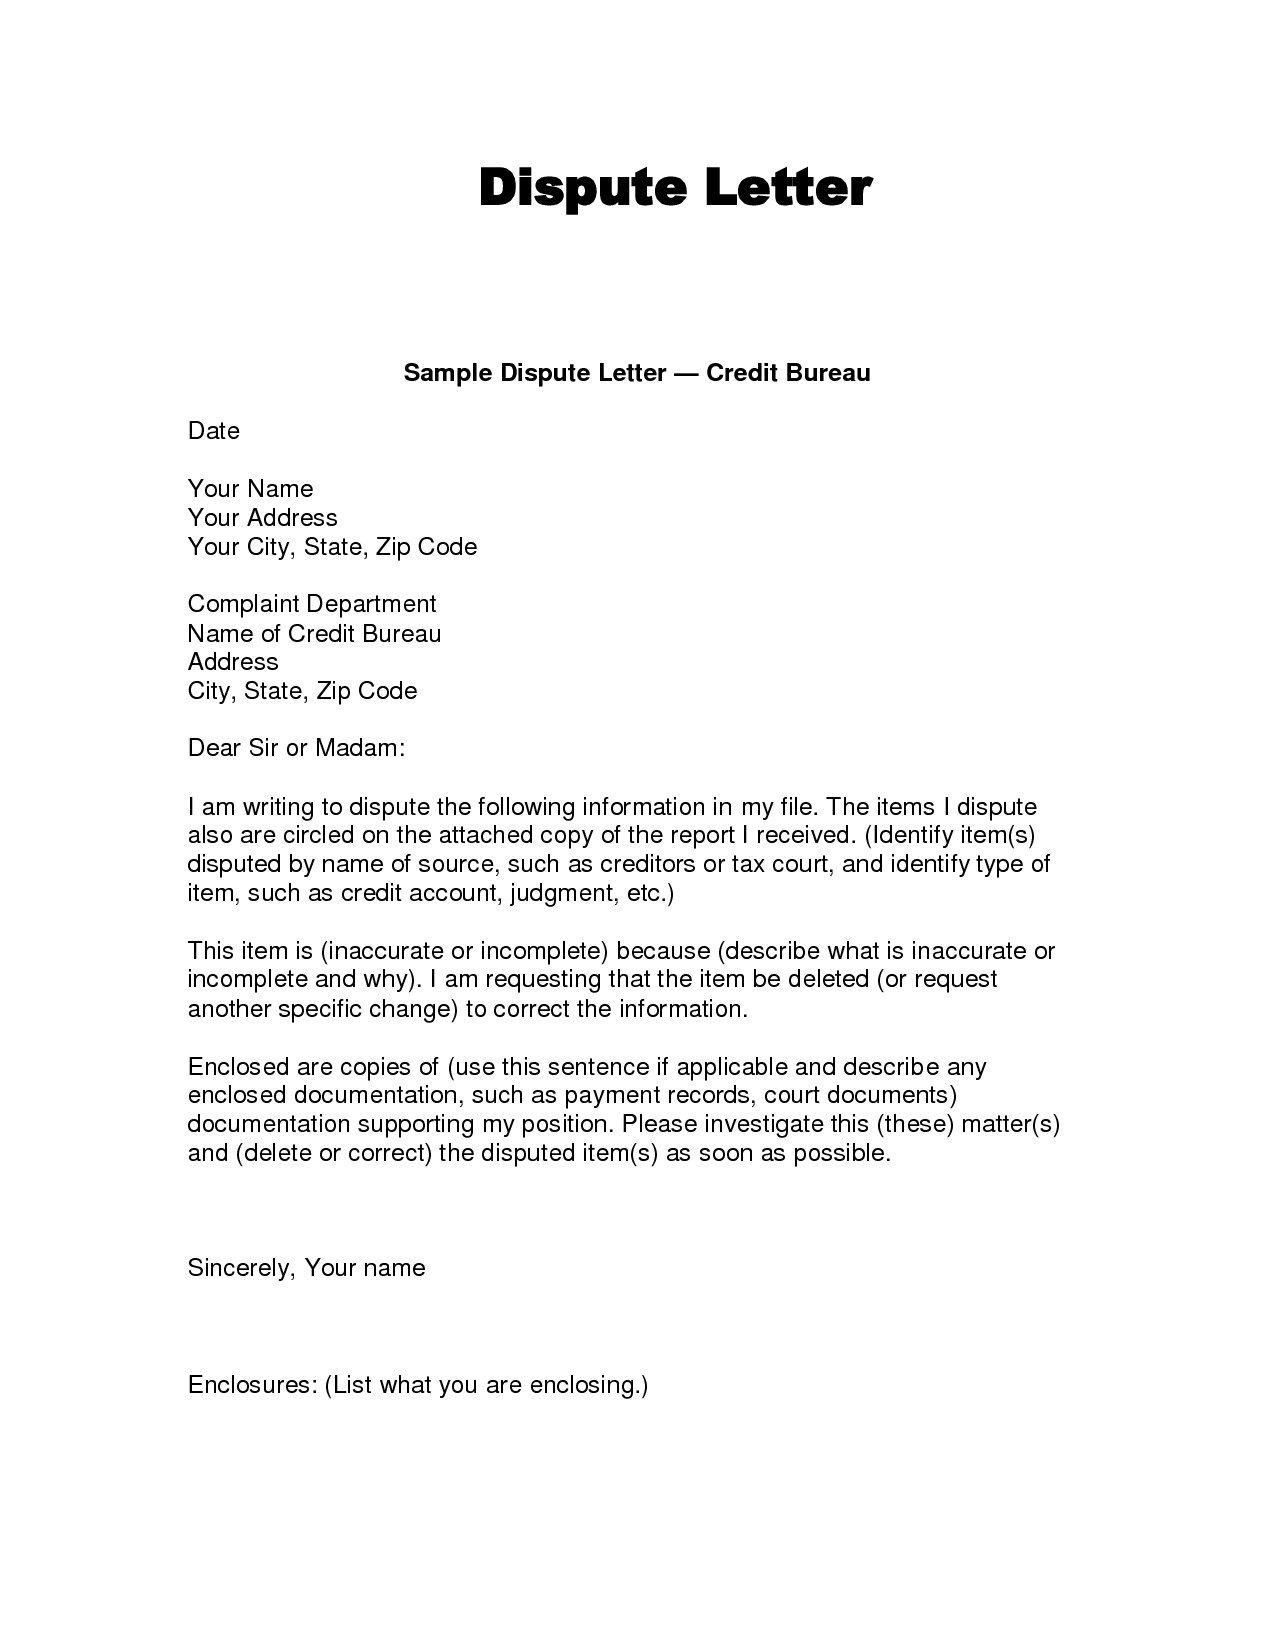 Repossession Dispute Letter Template - Letter format for Change Department Fresh Sample Credit Report